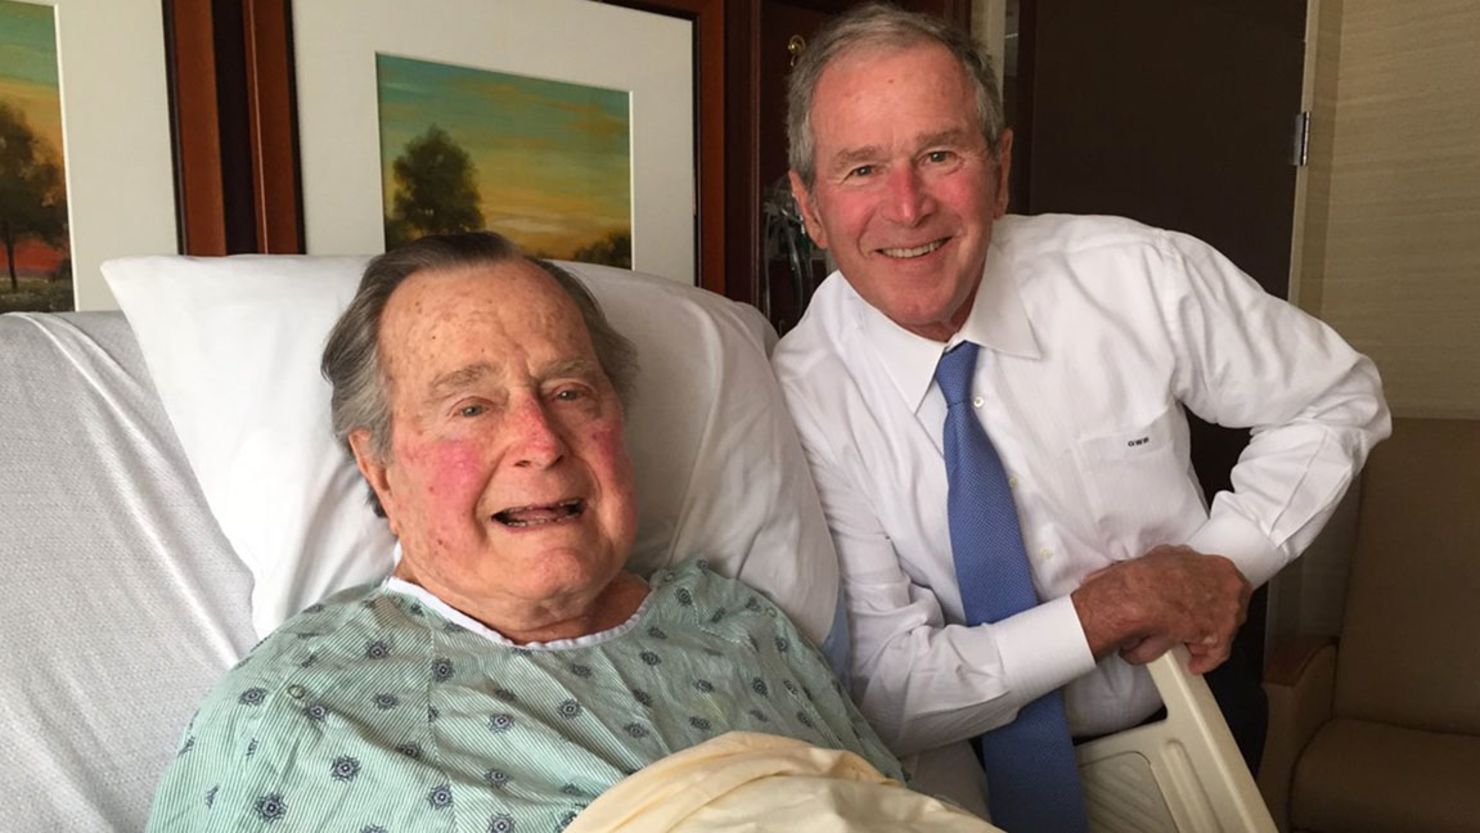 George W Bush visits his father George H.W. Bush in the hospital on April 20, 2017.